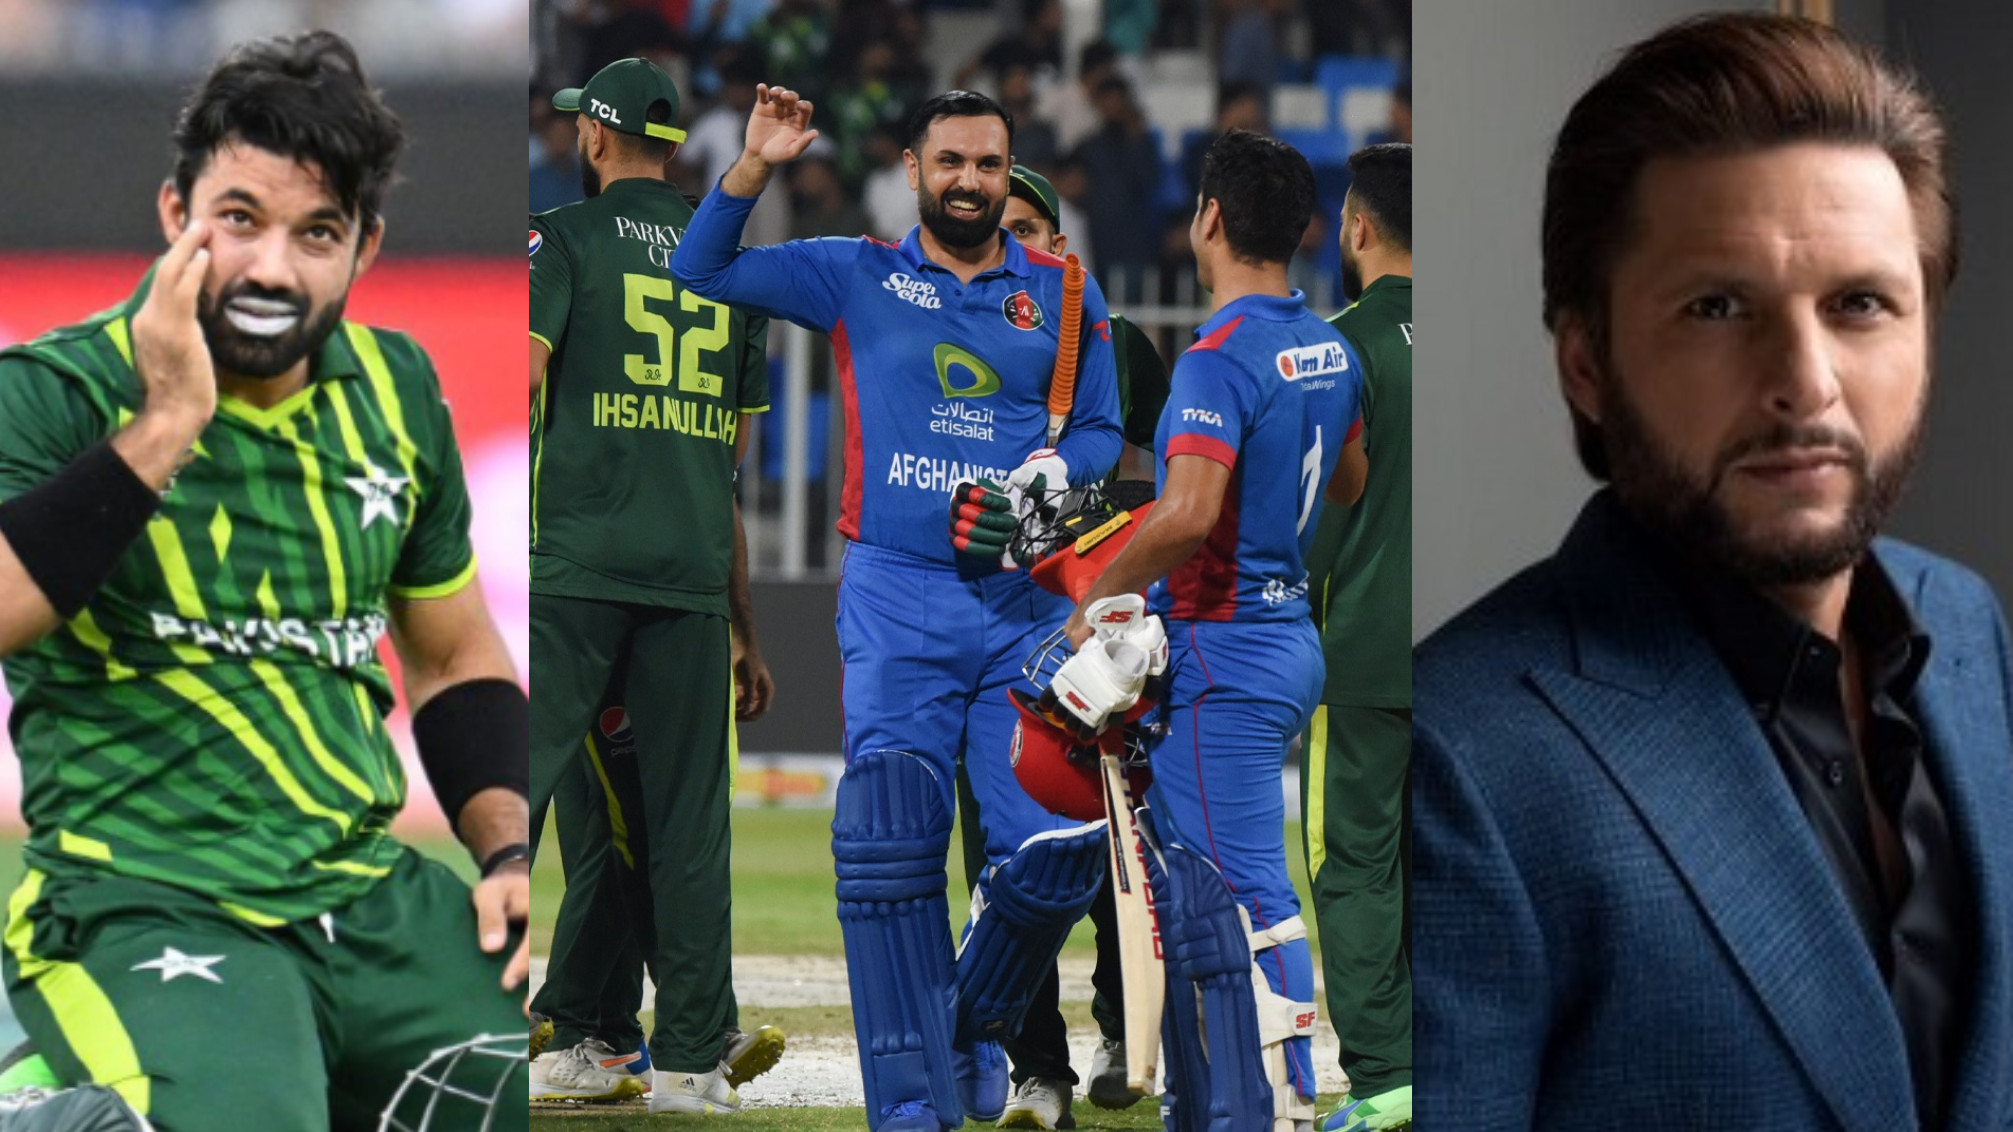 AFG v PAK 2023: Cricket fraternity reacts as Afghanistan seals historic series win over Pakistan by winning 2nd T20I